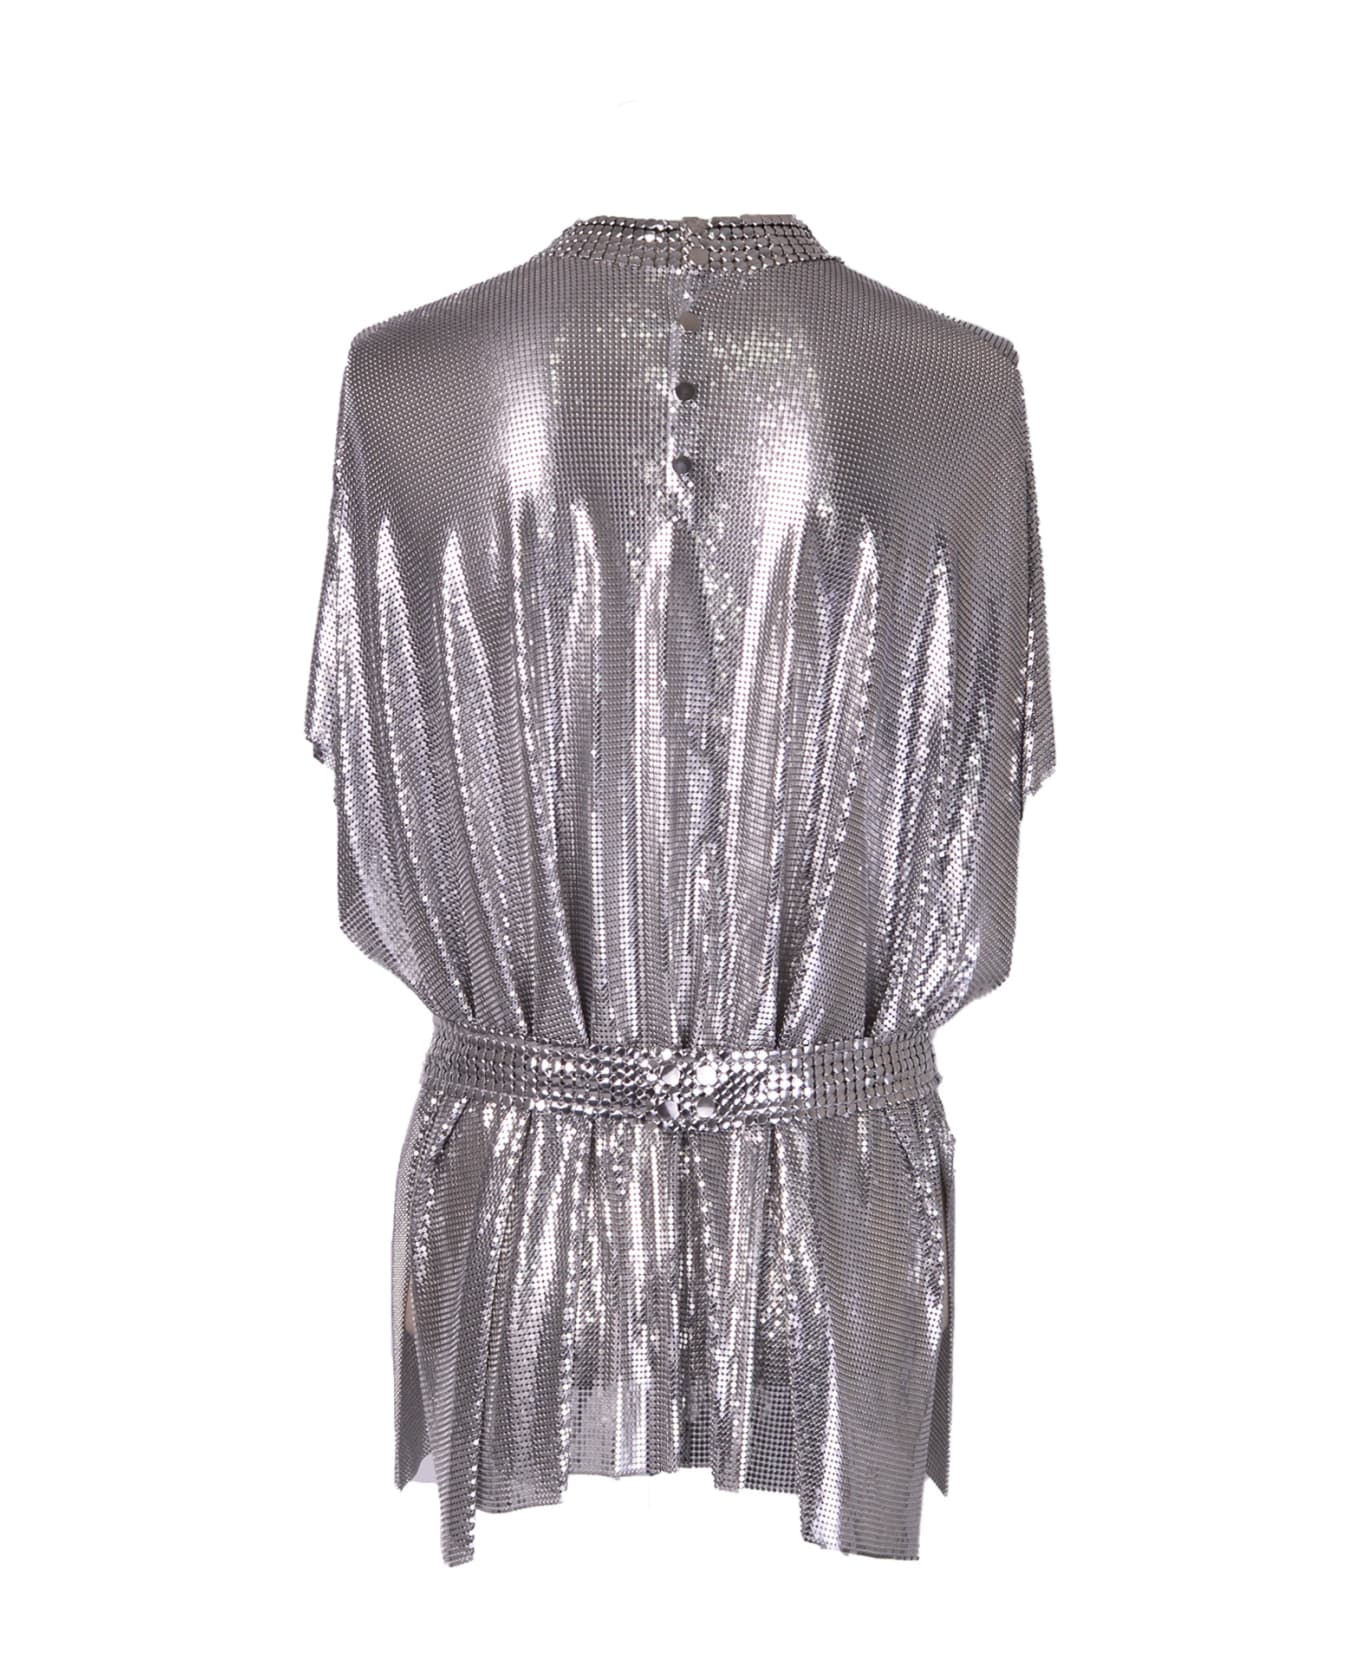 Paco Rabanne Top - Silver トップス